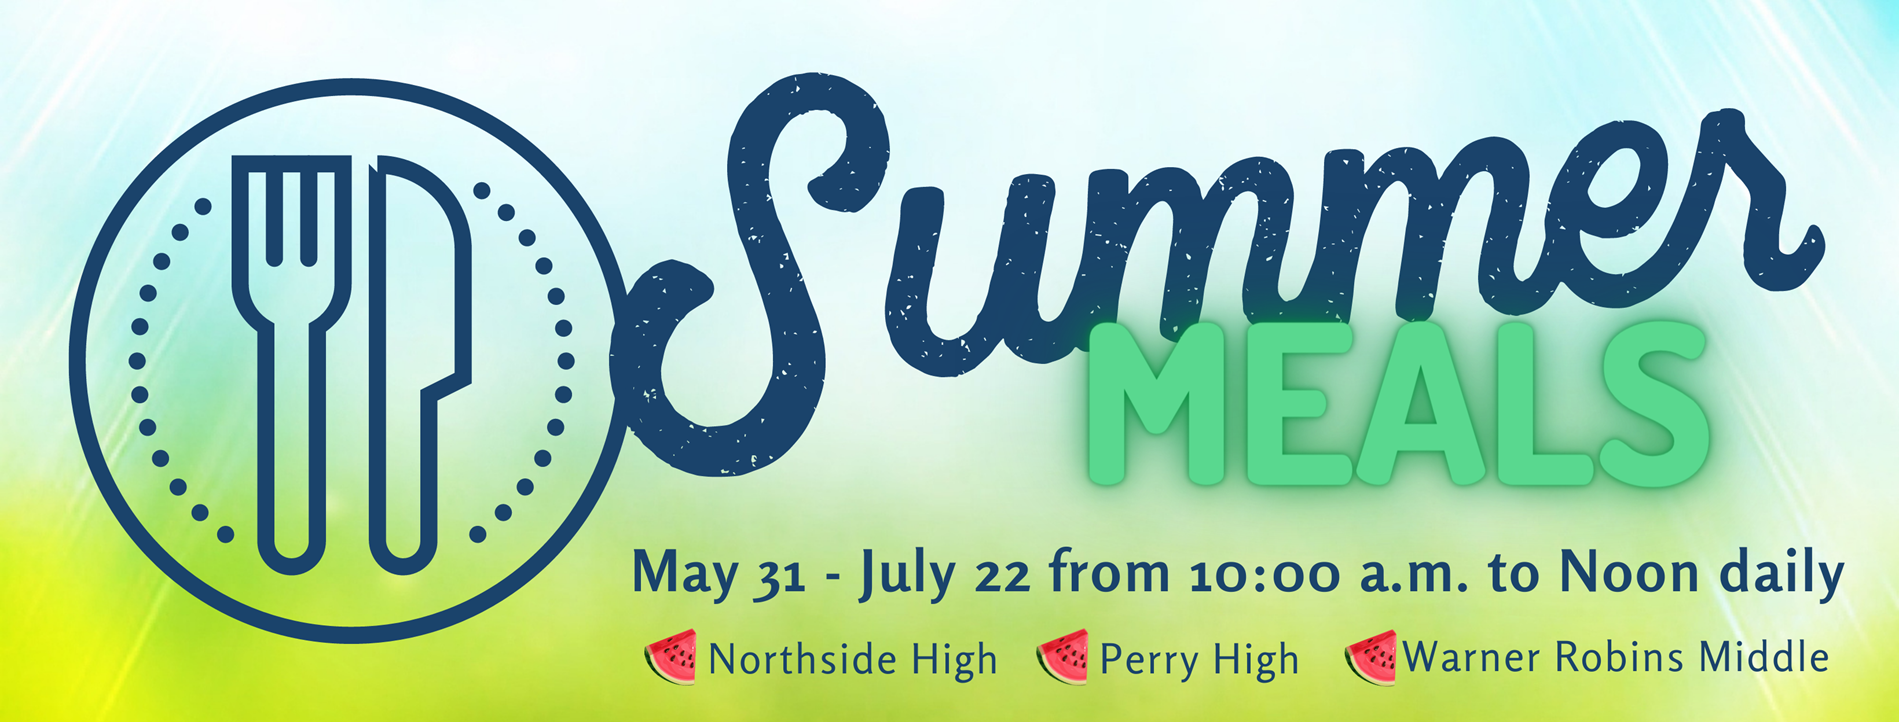 Summer Meals for Kids: May 31 - July 22